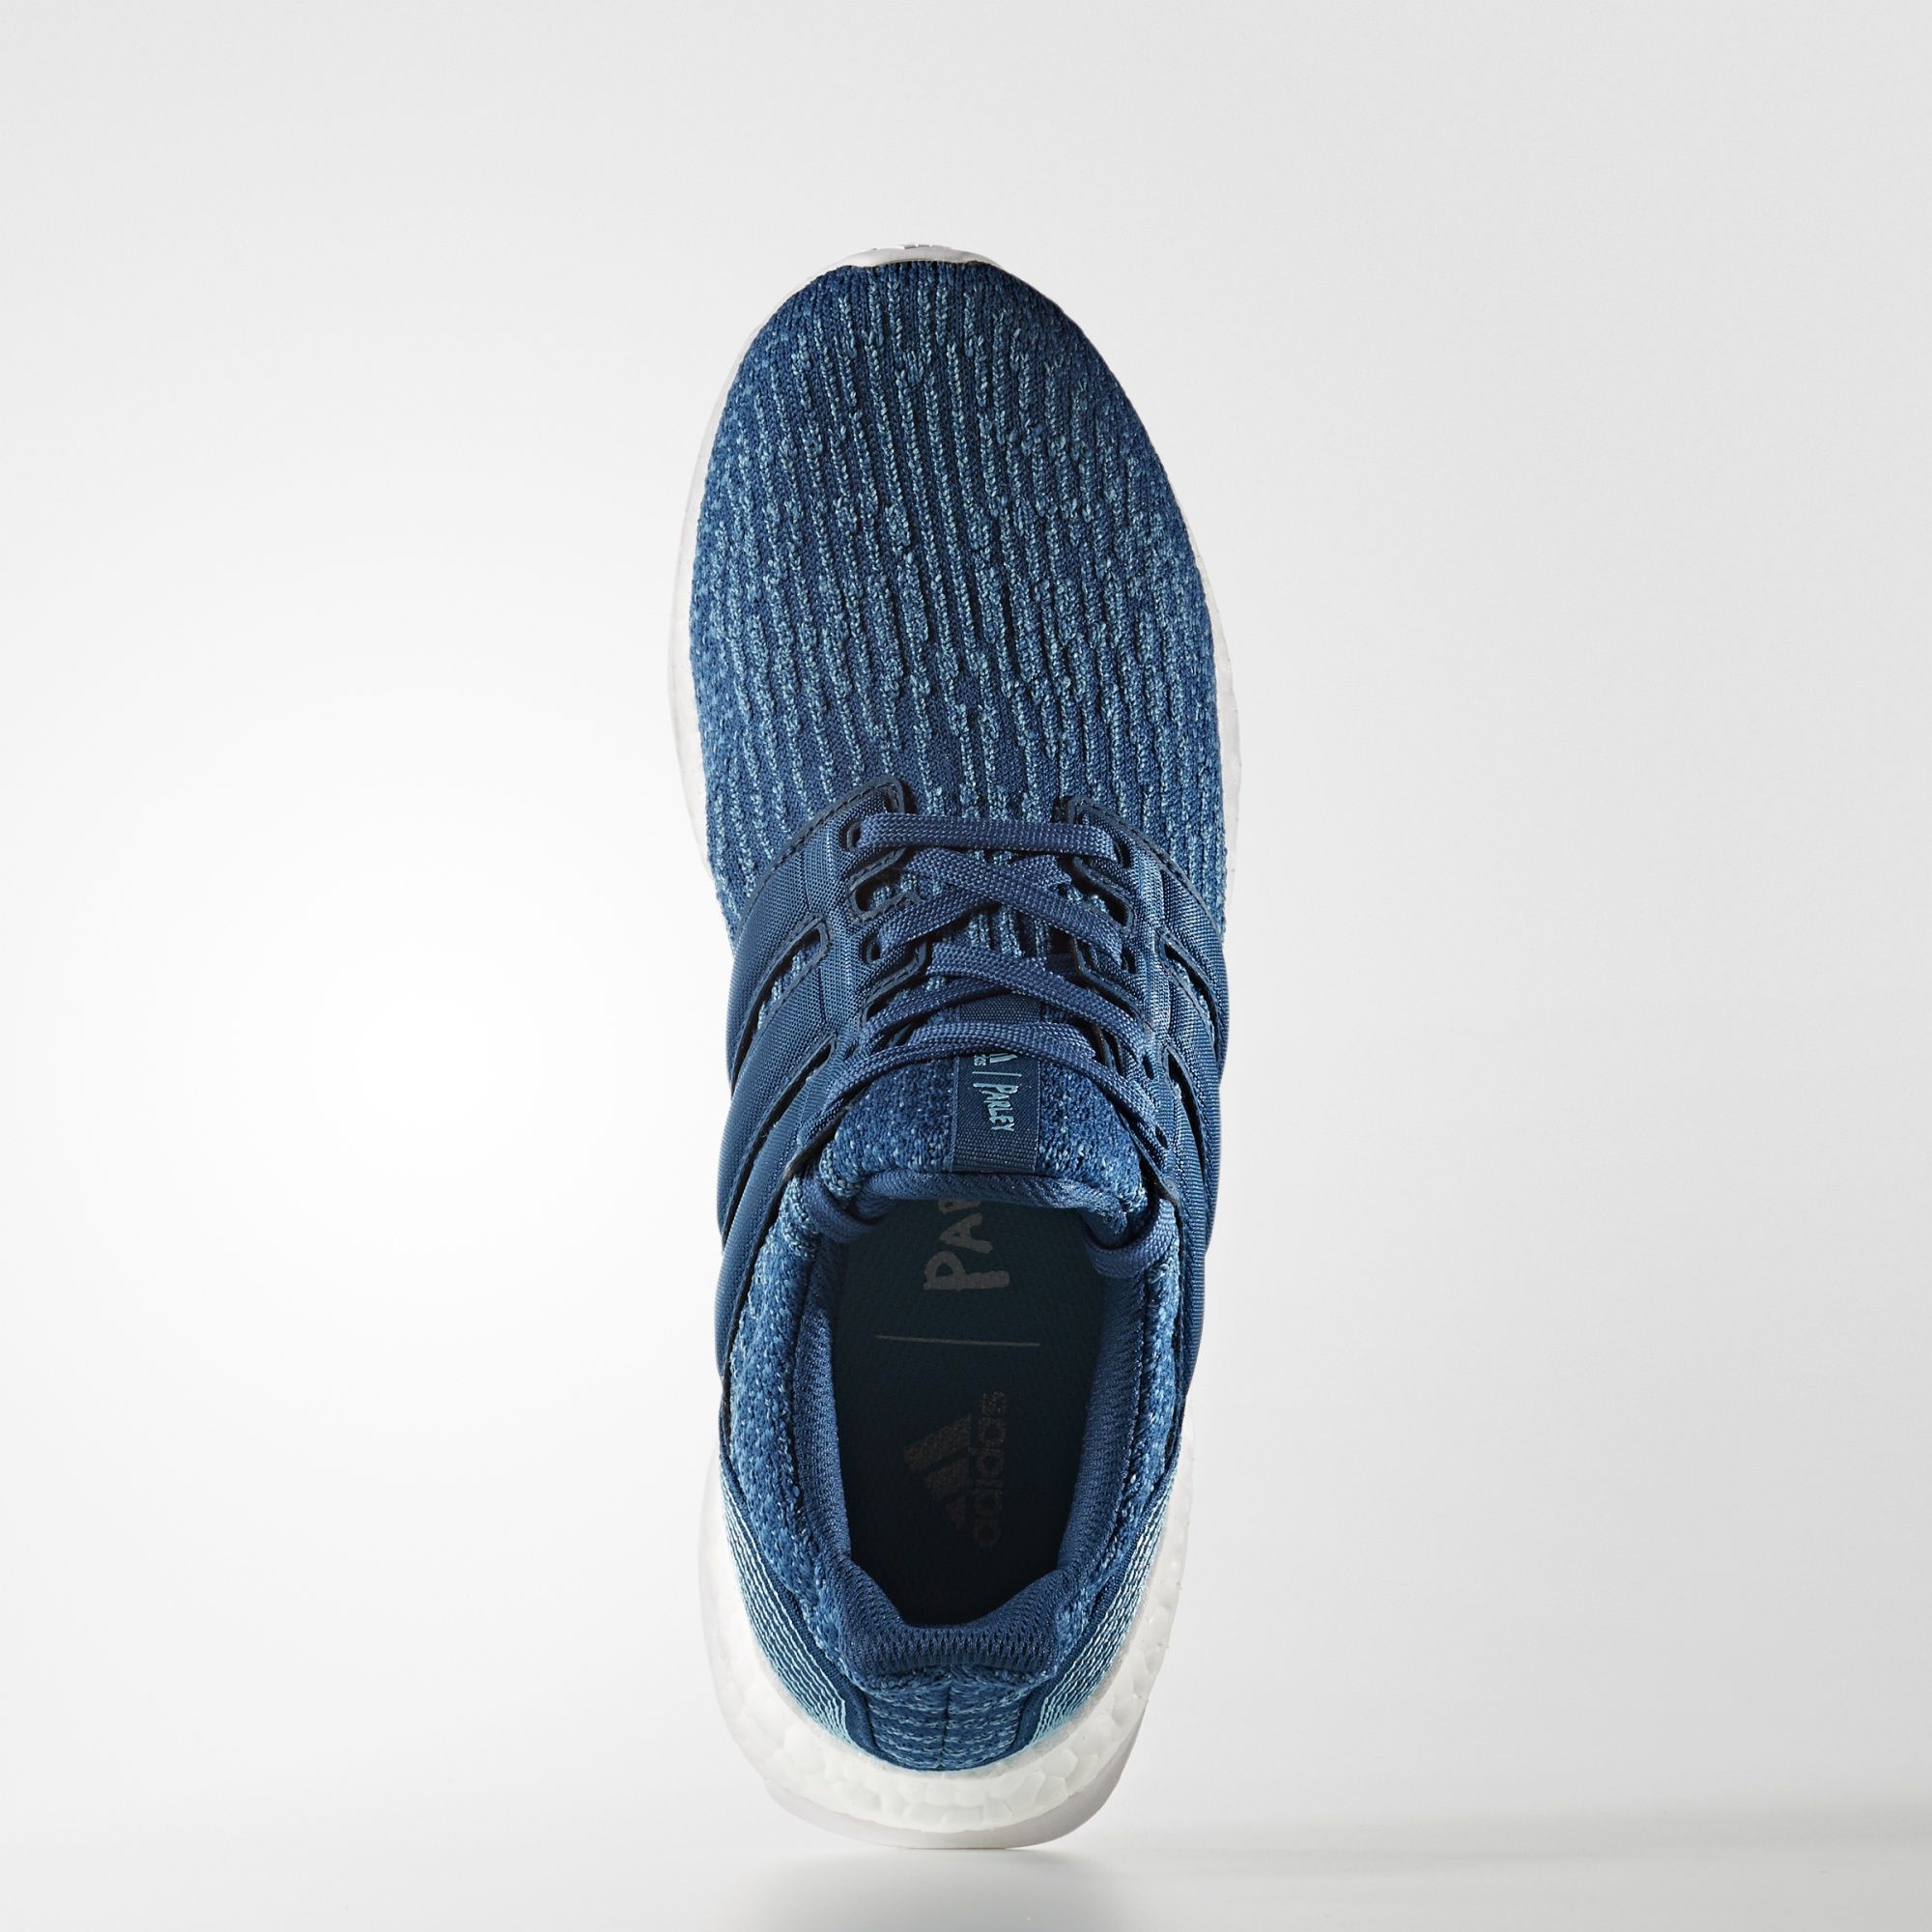 Adidas Ultra Boost Parley
Blue / White